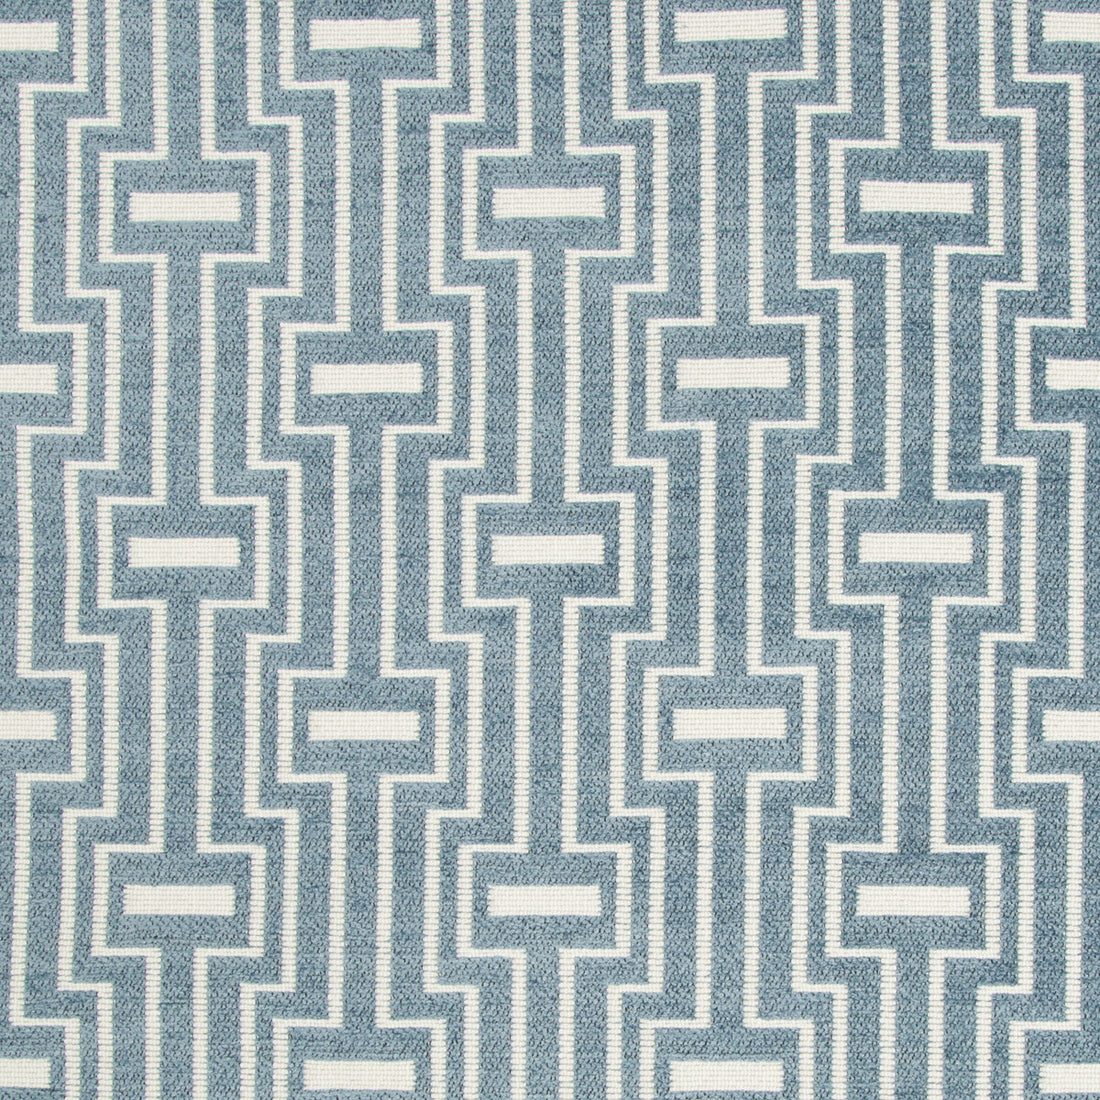 Kravet Contract fabric in 34753-5 color - pattern 34753.5.0 - by Kravet Contract in the Gis collection